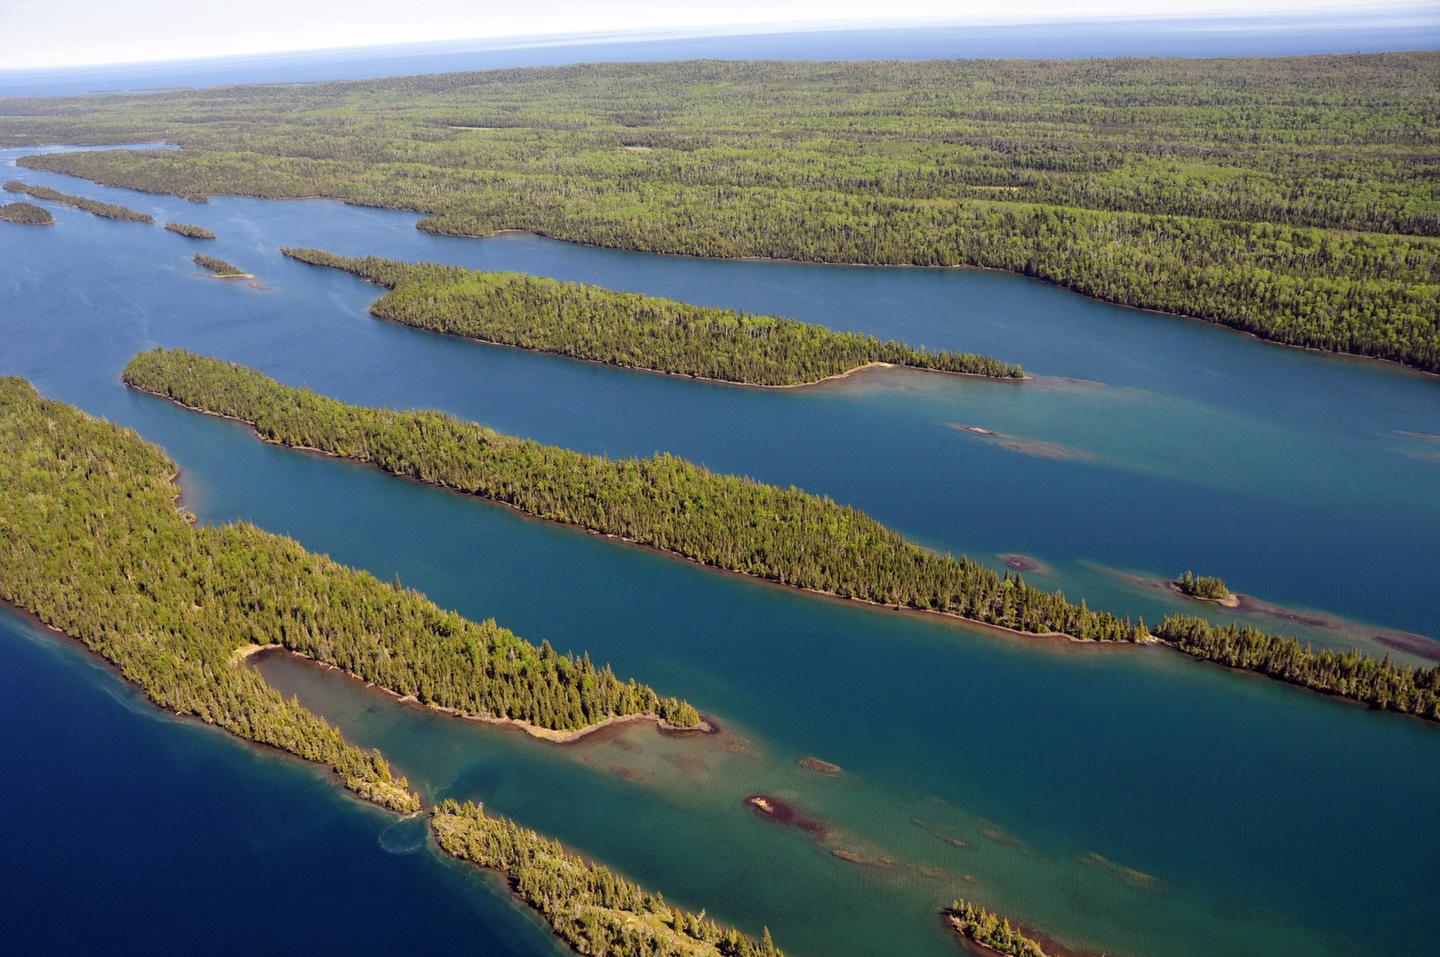 Aerial View of Belle HarborIsle Royale is also called Minong, which means "the good place" by the Grand Portage Band of Lake Superior Chippewa. Minong is a part of the ancestral lands of the Anishinaabe/Ojibwe peoples who have cared for these lands from time immemorial.